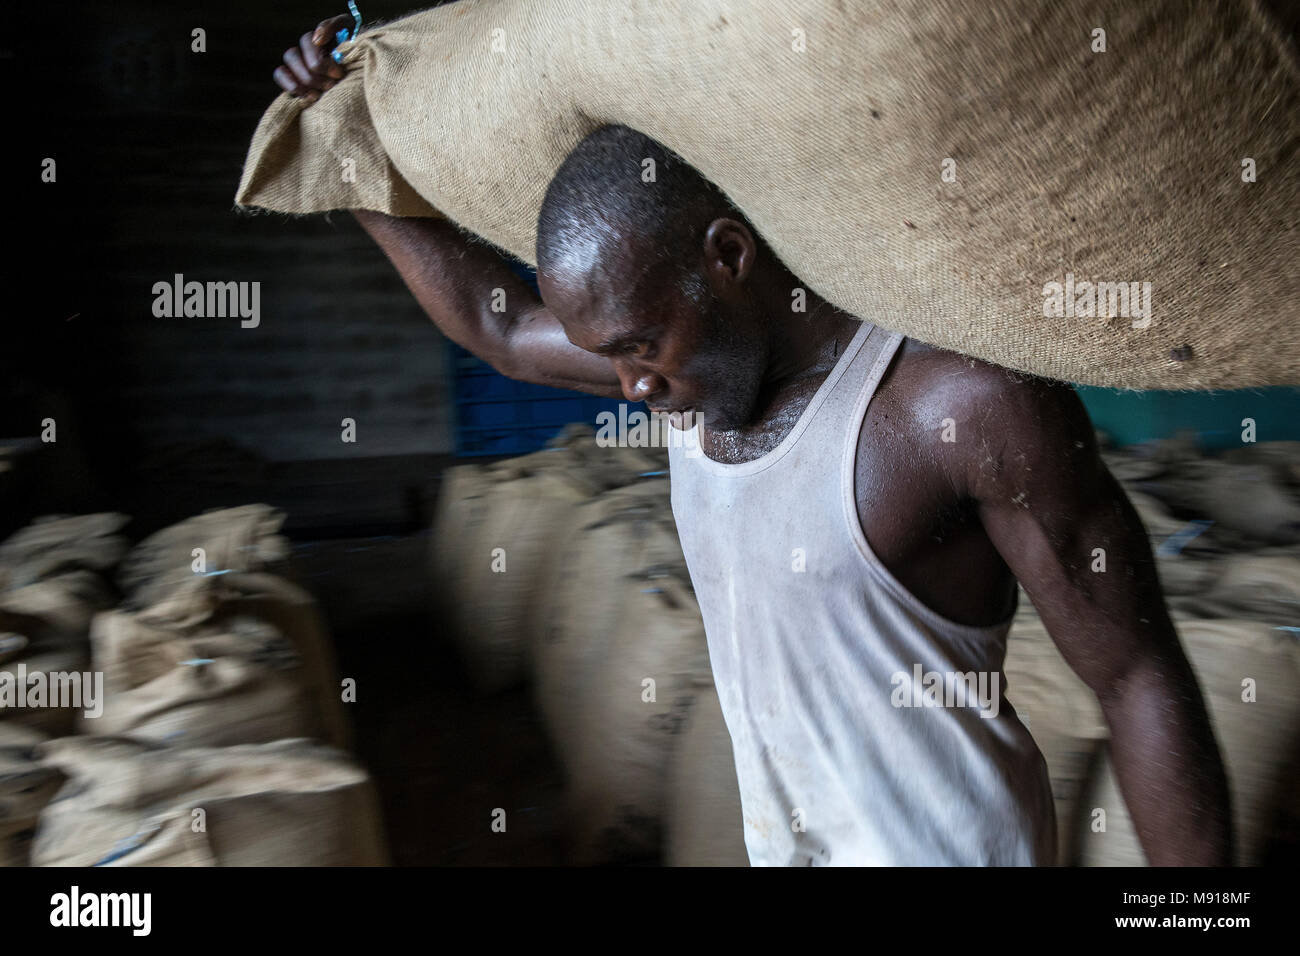 Ivory Coast. Worker carrying cocoa bags. Stock Photo